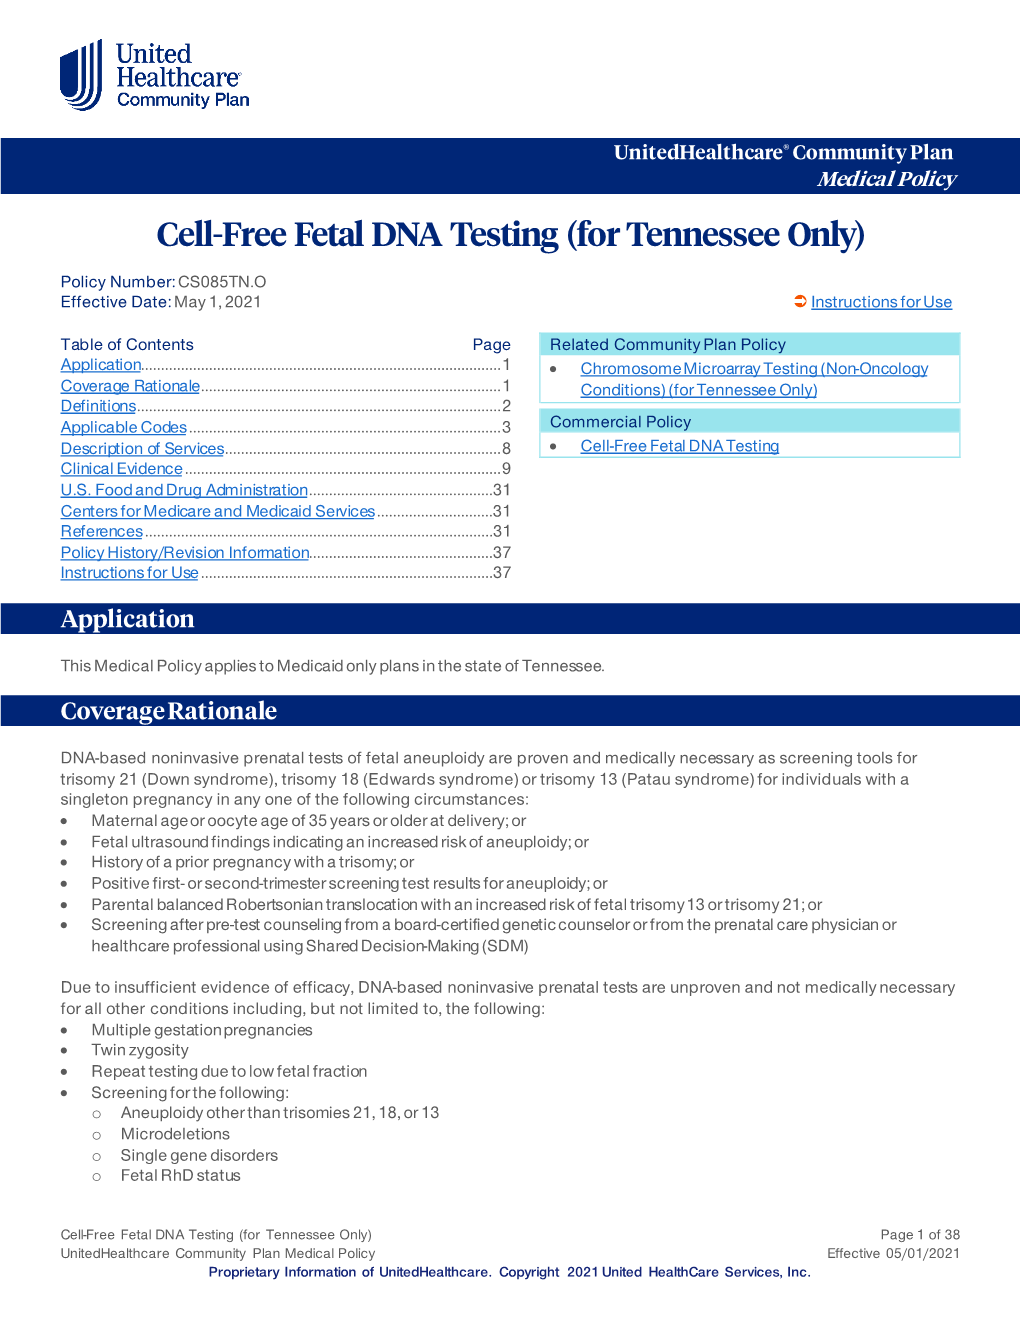 Cell-Free Fetal DNA Testing (For Tennessee Only)